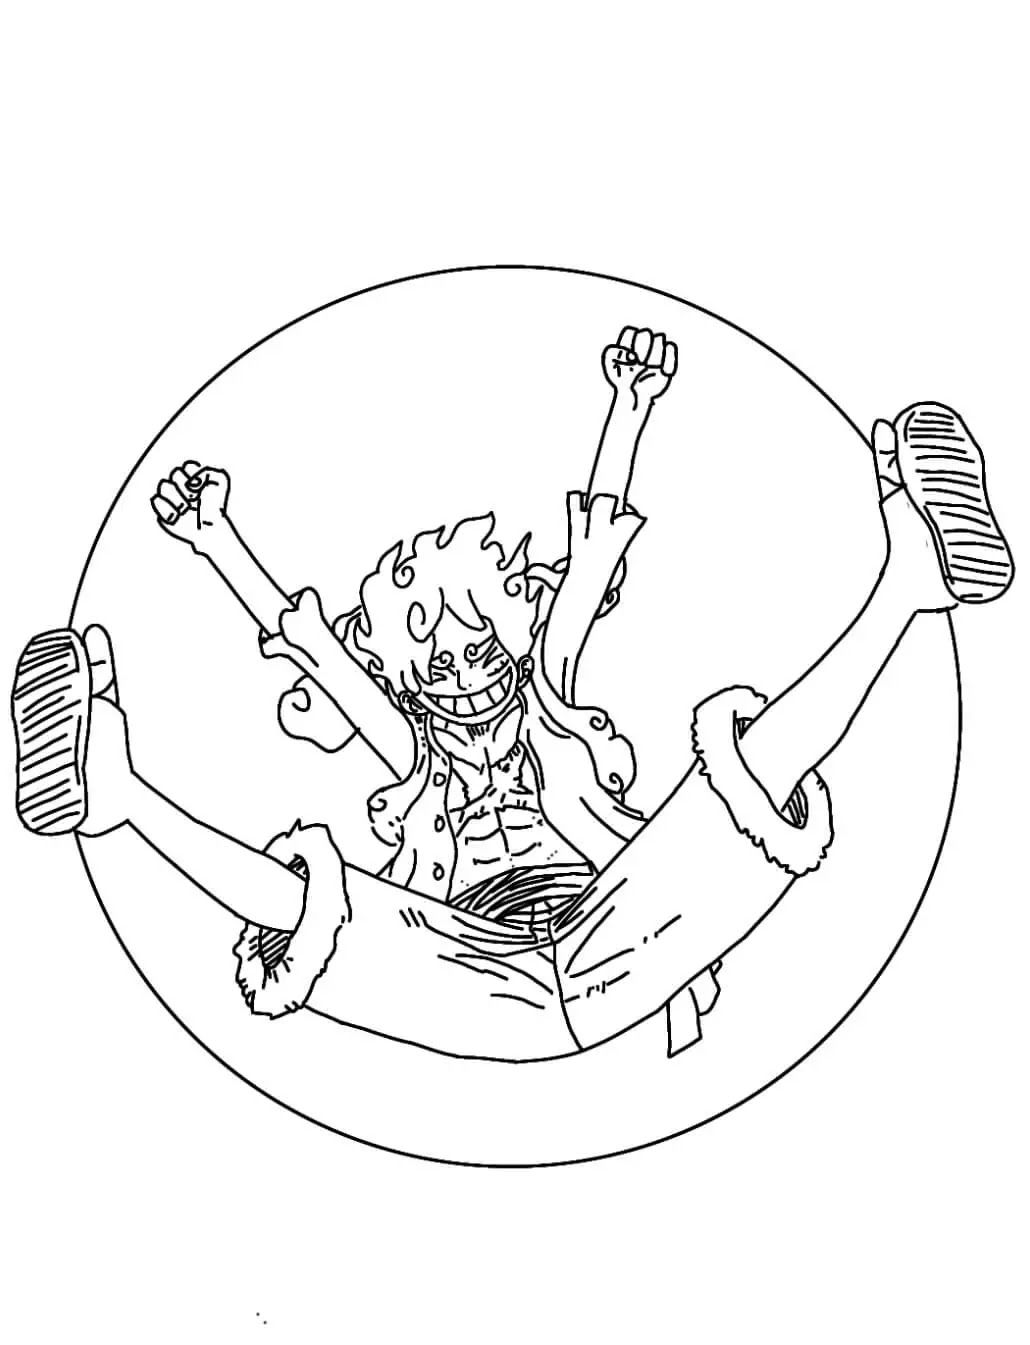 Luffy Gear 5 Coloring Pages from one piece | Desenhos, Anime, Desenho de  anime